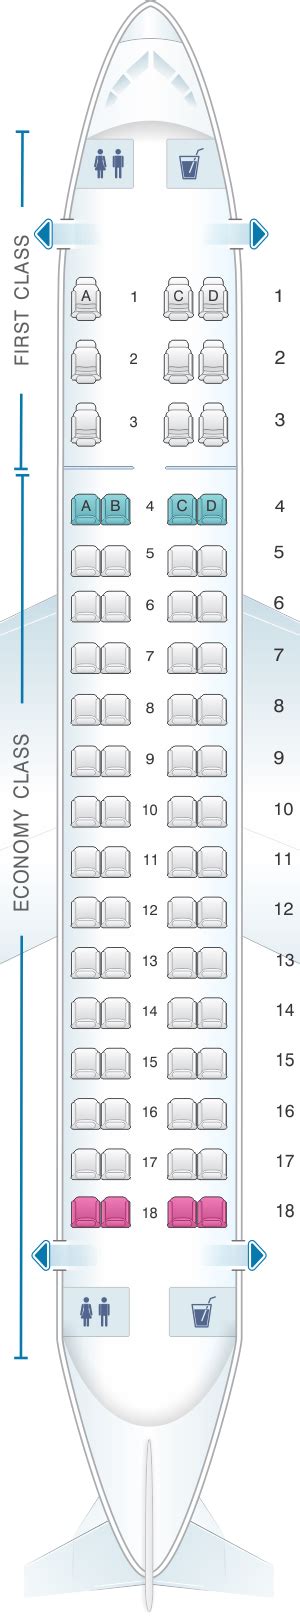 The American Airlines Embraer ERJ 145 features 50 seats in a 1 cabin configuration. Economy has 50 seats in a 1-2 config; this is pretty standard for these aircraft. Legroom-wise, the Economy pitch of 31" is average, though of course what that means for you depends on how tall you are! imperial metric.. 